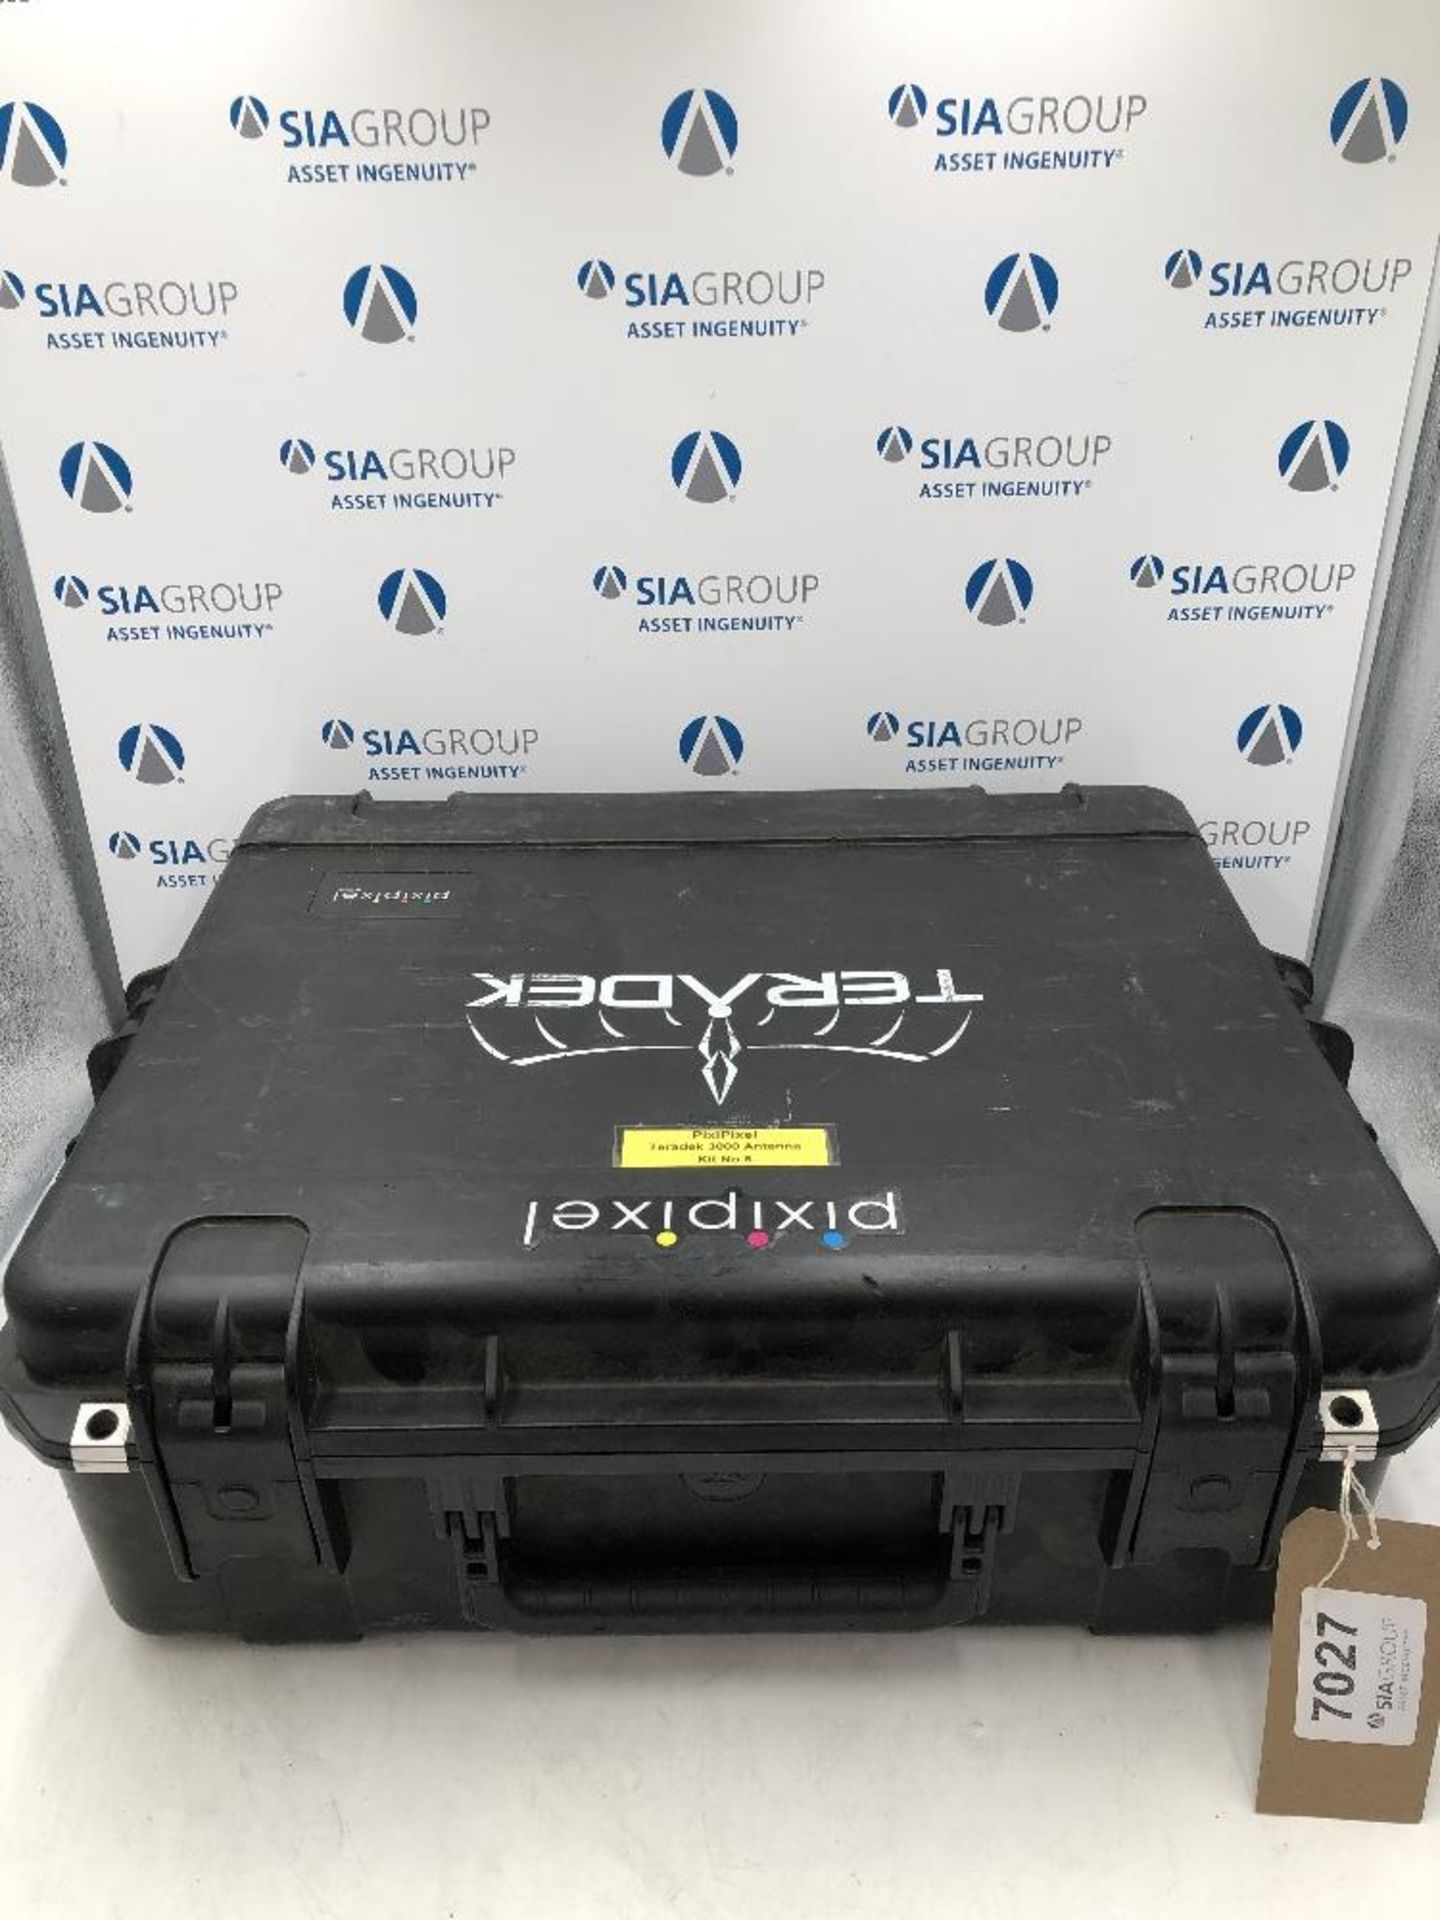 Teradek Bolt 3000 Array Panel/Antenna With Array Mount And Carry Case - Image 4 of 4